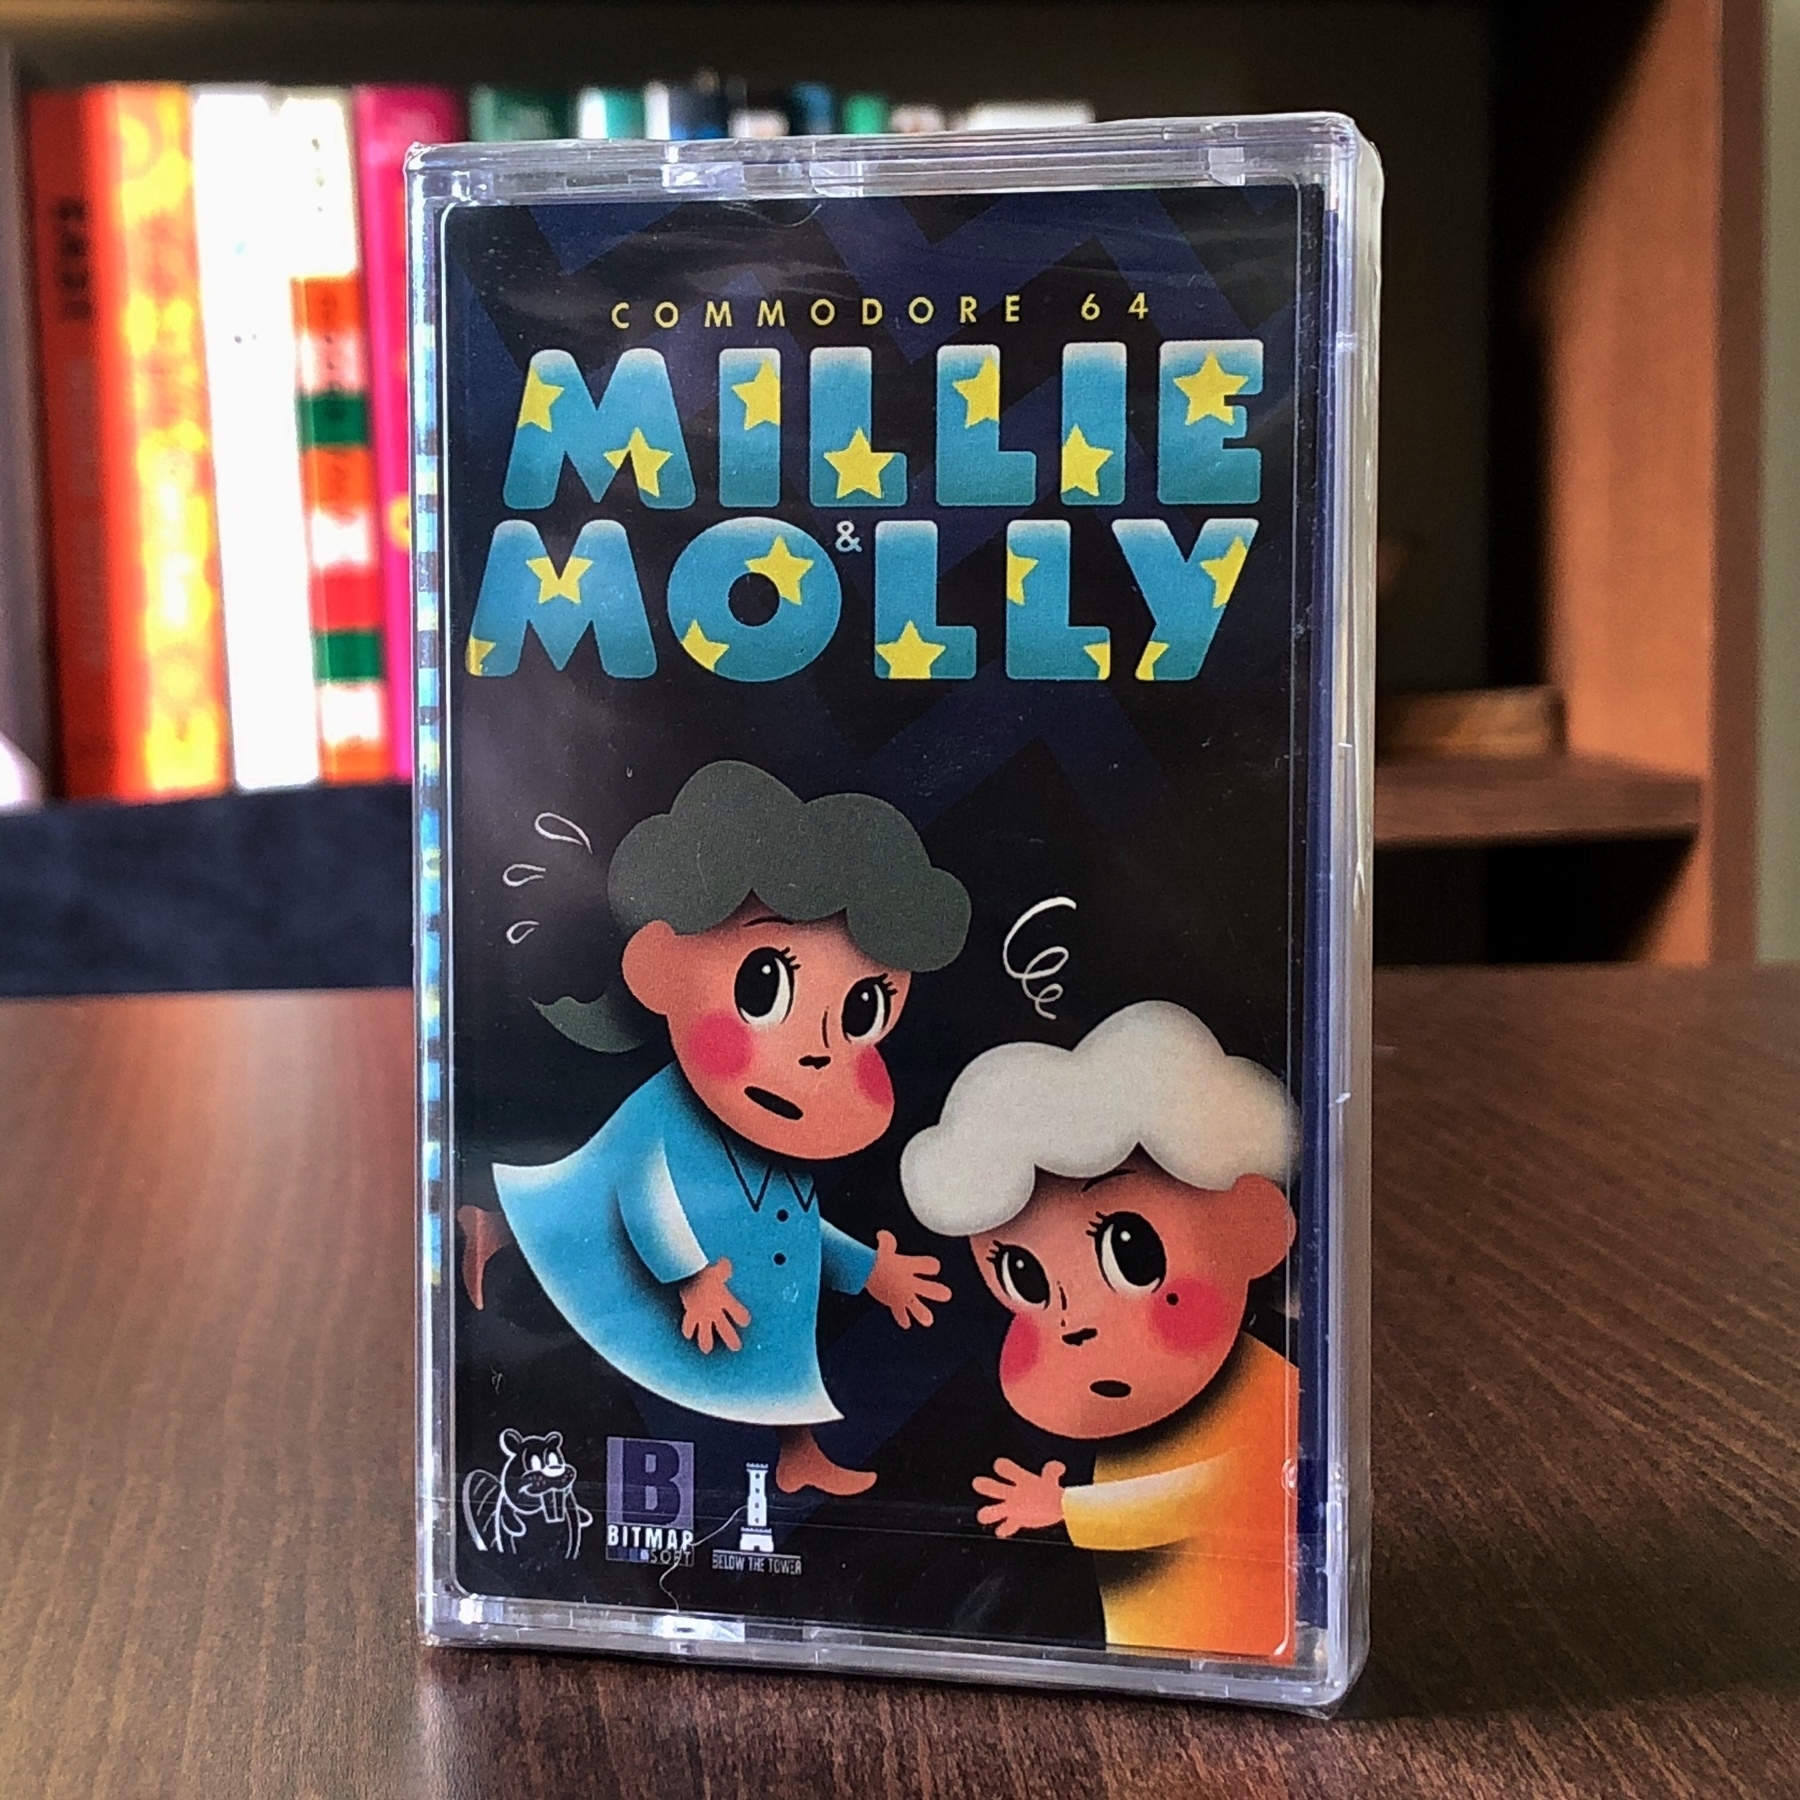 Commodore 64 cassette tape game Millie ans Molly with illustrated cover showing the main characters.